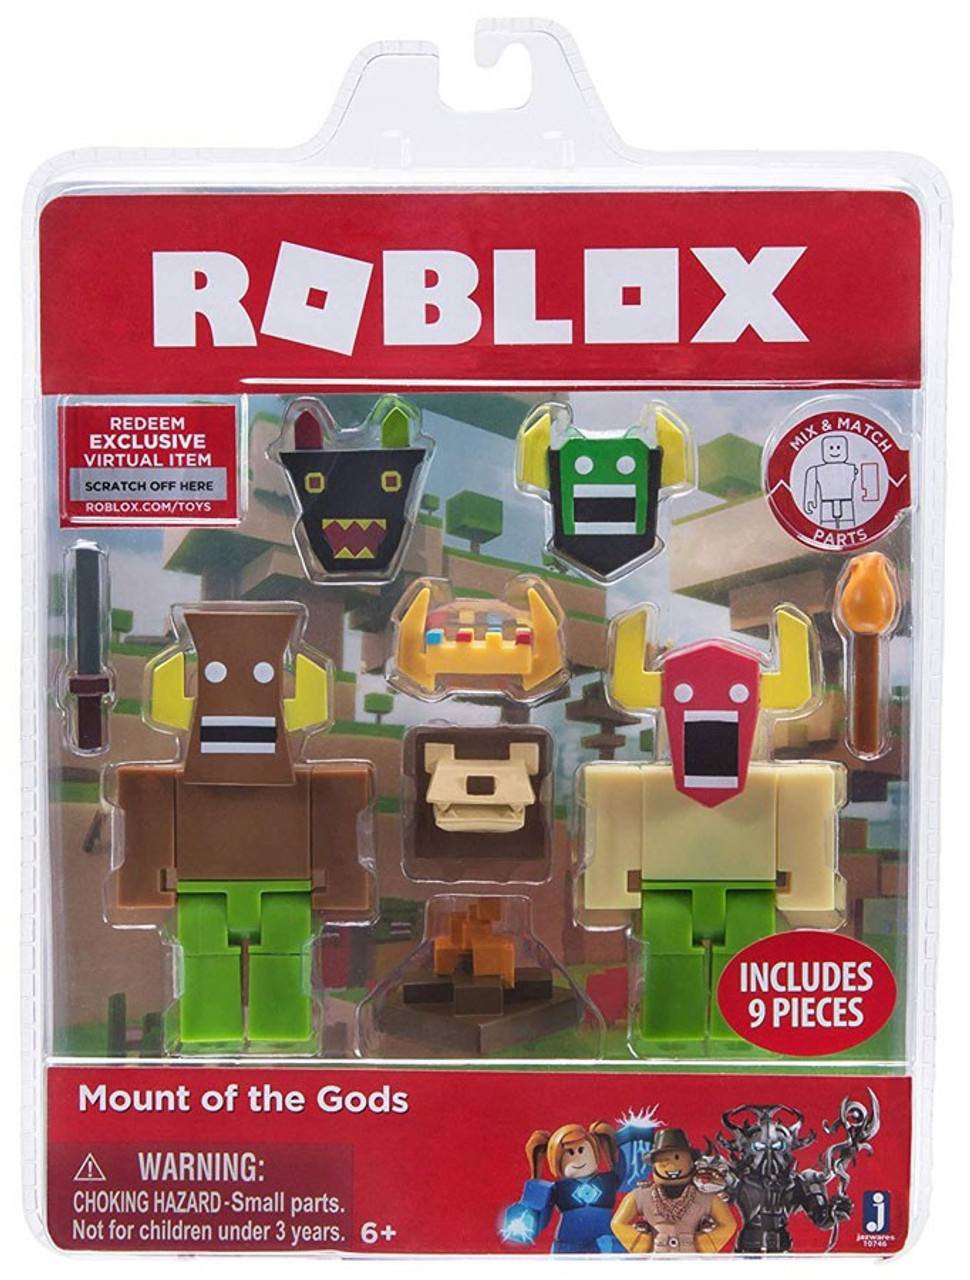 Roblox Operation Tnt Large Playset Characters Accessories W Virtual Code Tv Action Figures Tv Movie Video Game Action Figures - roblox toys operation tnt